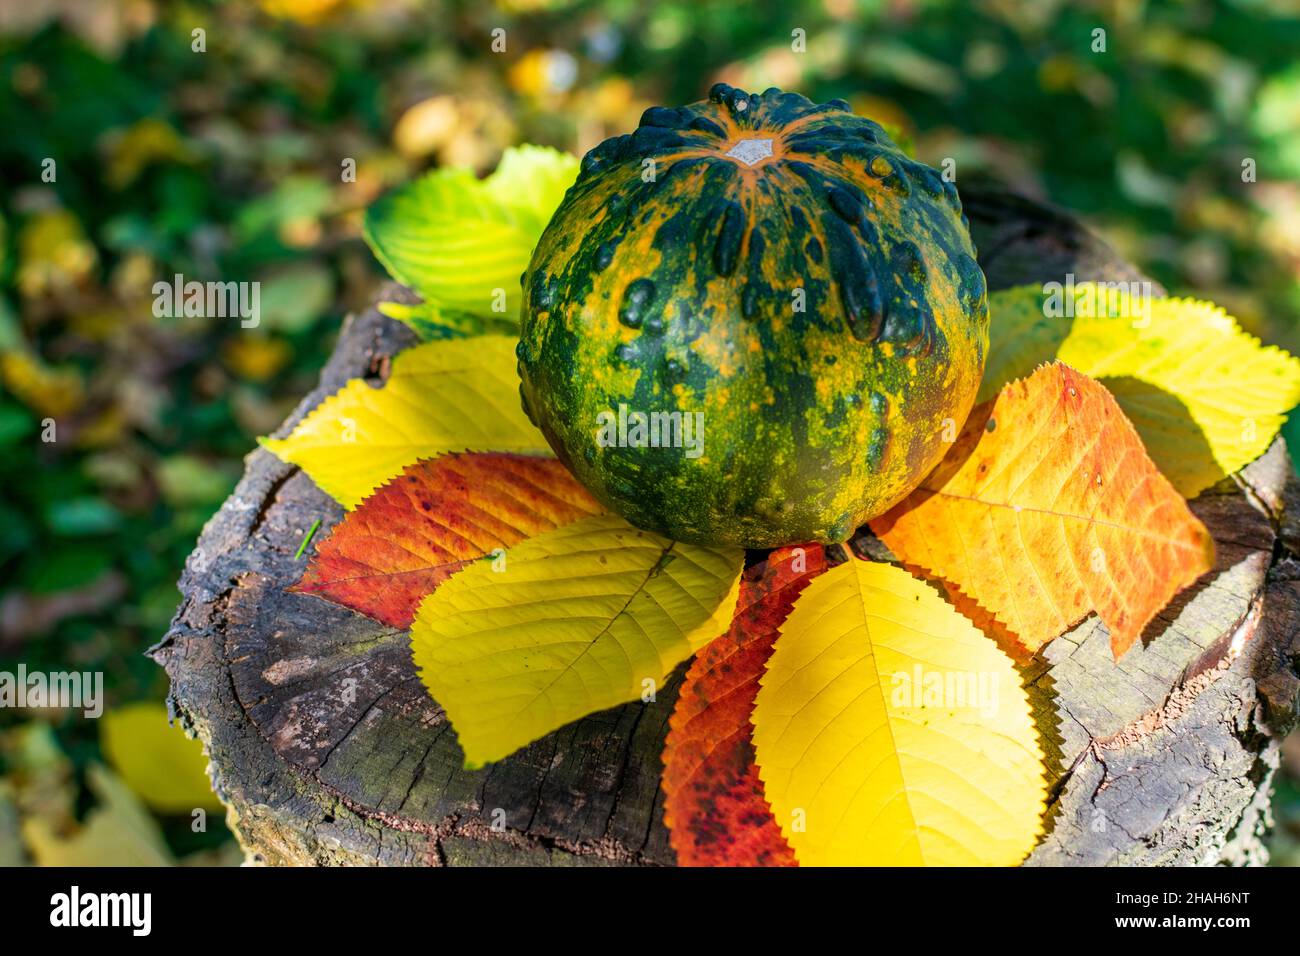 Green gourd or pumpkin with stripes on a wooden table covered by autumn colored leaves enlightened by sunset Stock Photo